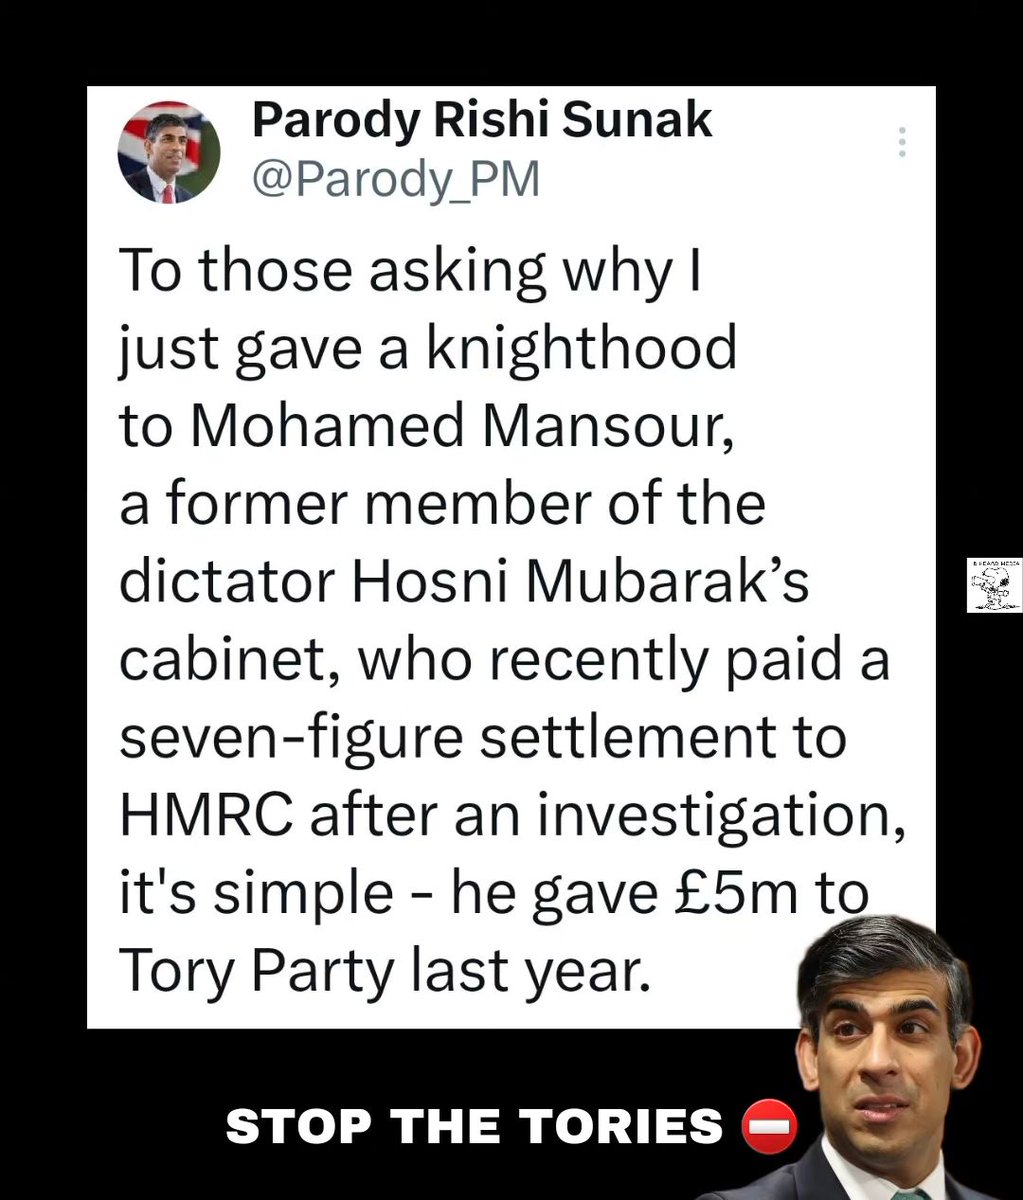 Mohamed Mansour family’s companies continued to operate in Russia after it launched its invasion of Ukraine.

#RishiSunak #ToryRussianMoney #ToryCorruption #ToryCriminals #StopTheTories
#GeneralElectionNow #ToriesOut